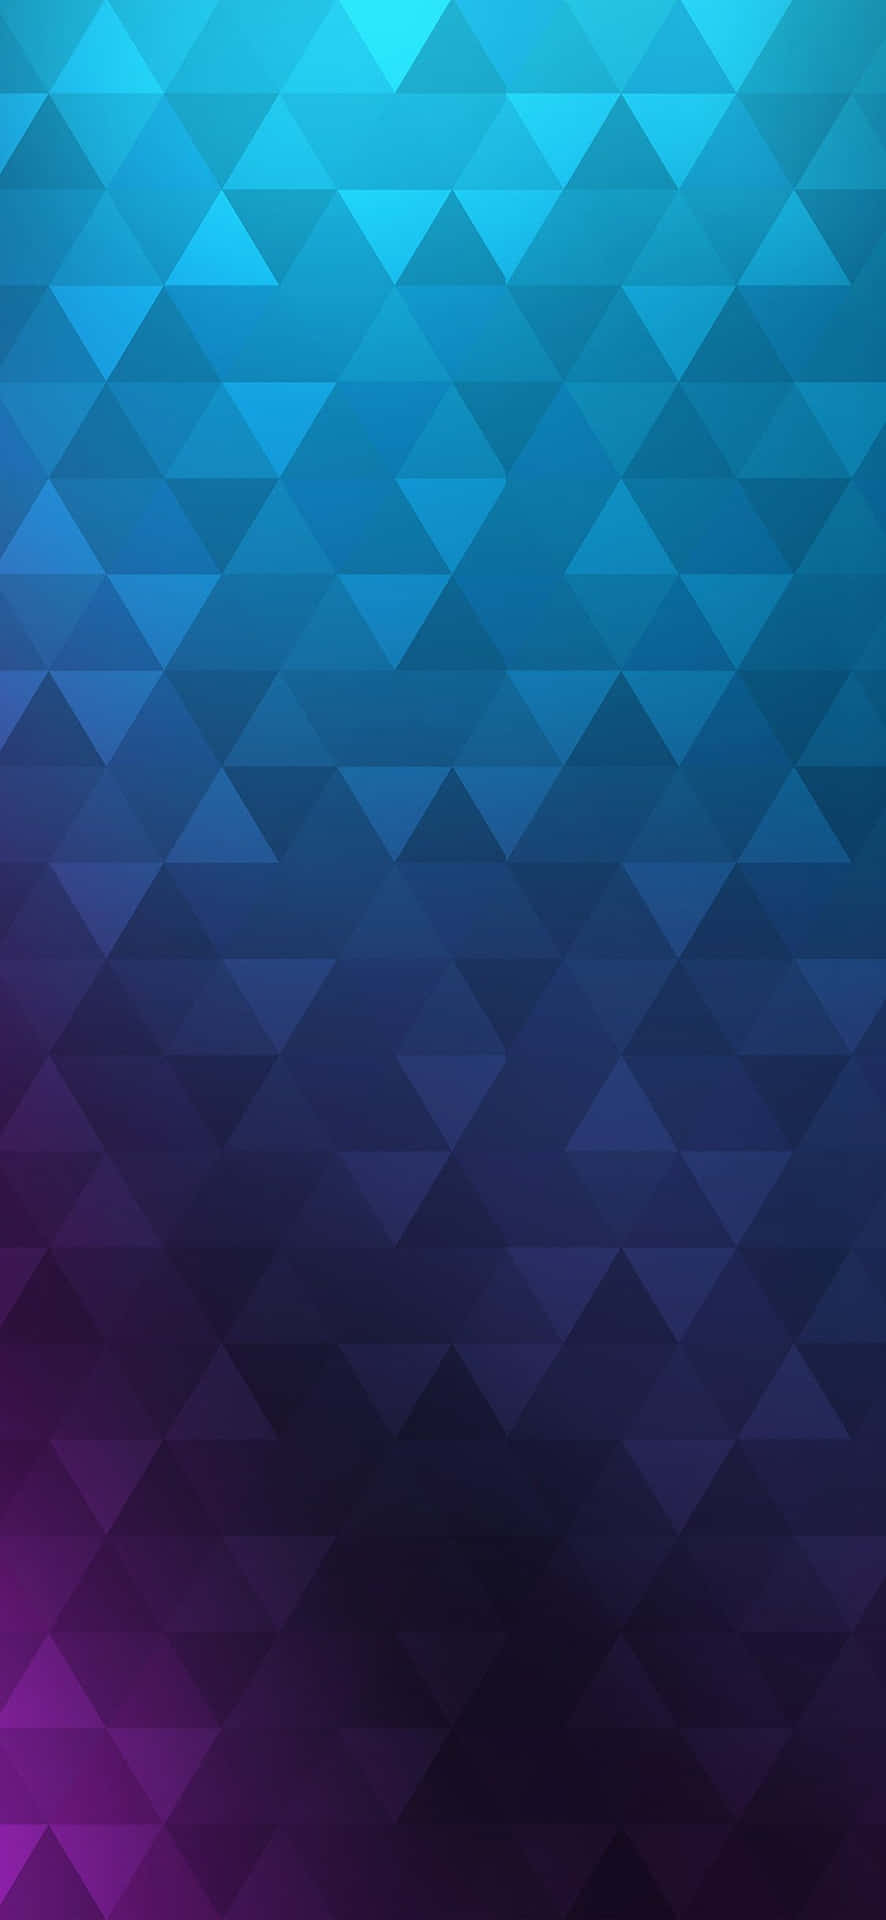 Iphone X Abstract Triangle Pattern Wallpaper